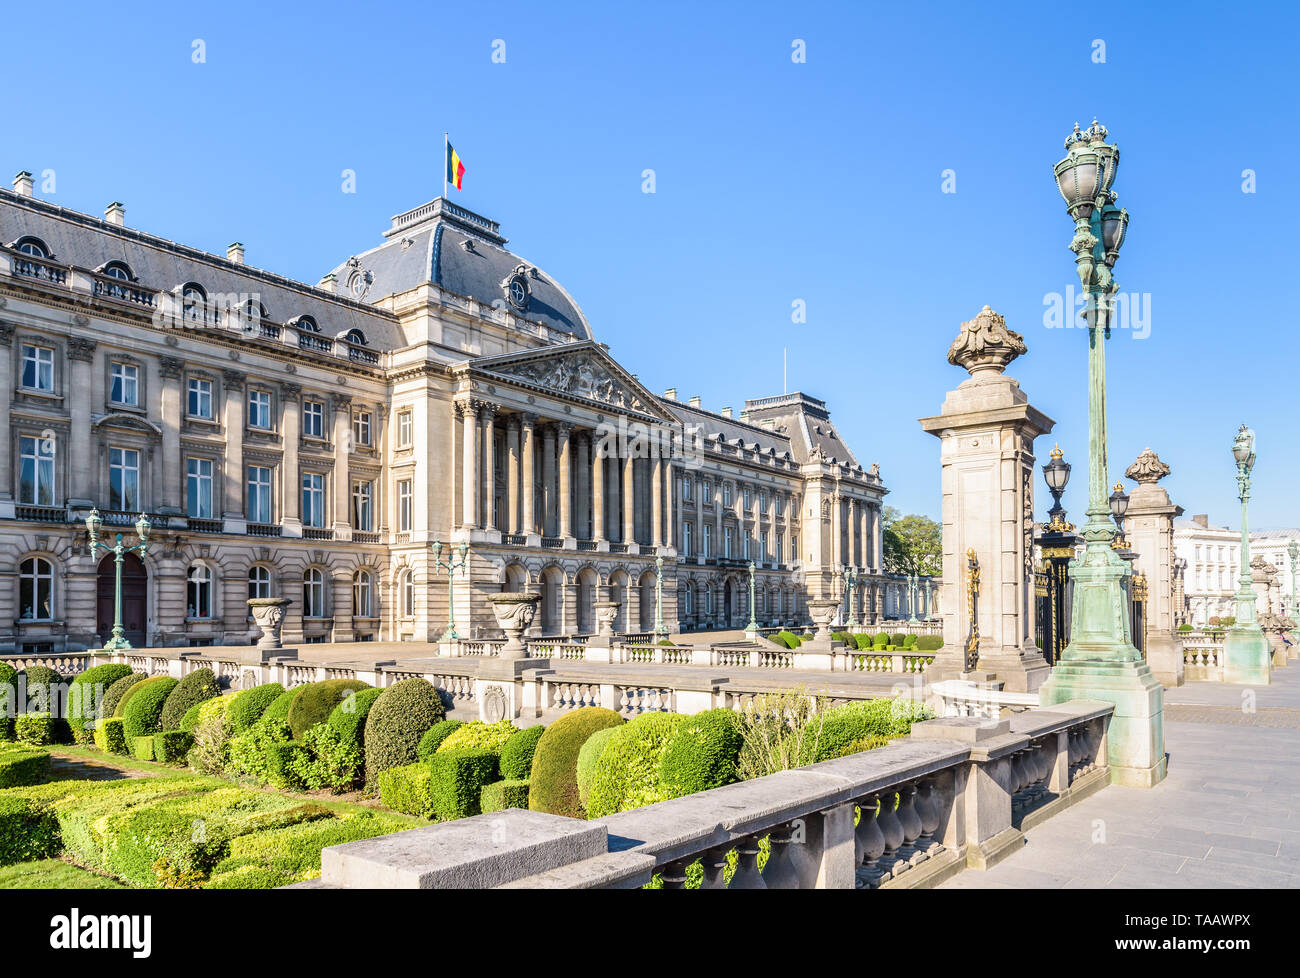 Main facade and front garden of the Royal Palace of Brussels, the official palace of the King and Queen of the Belgians in Brussels, Belgium. Stock Photo